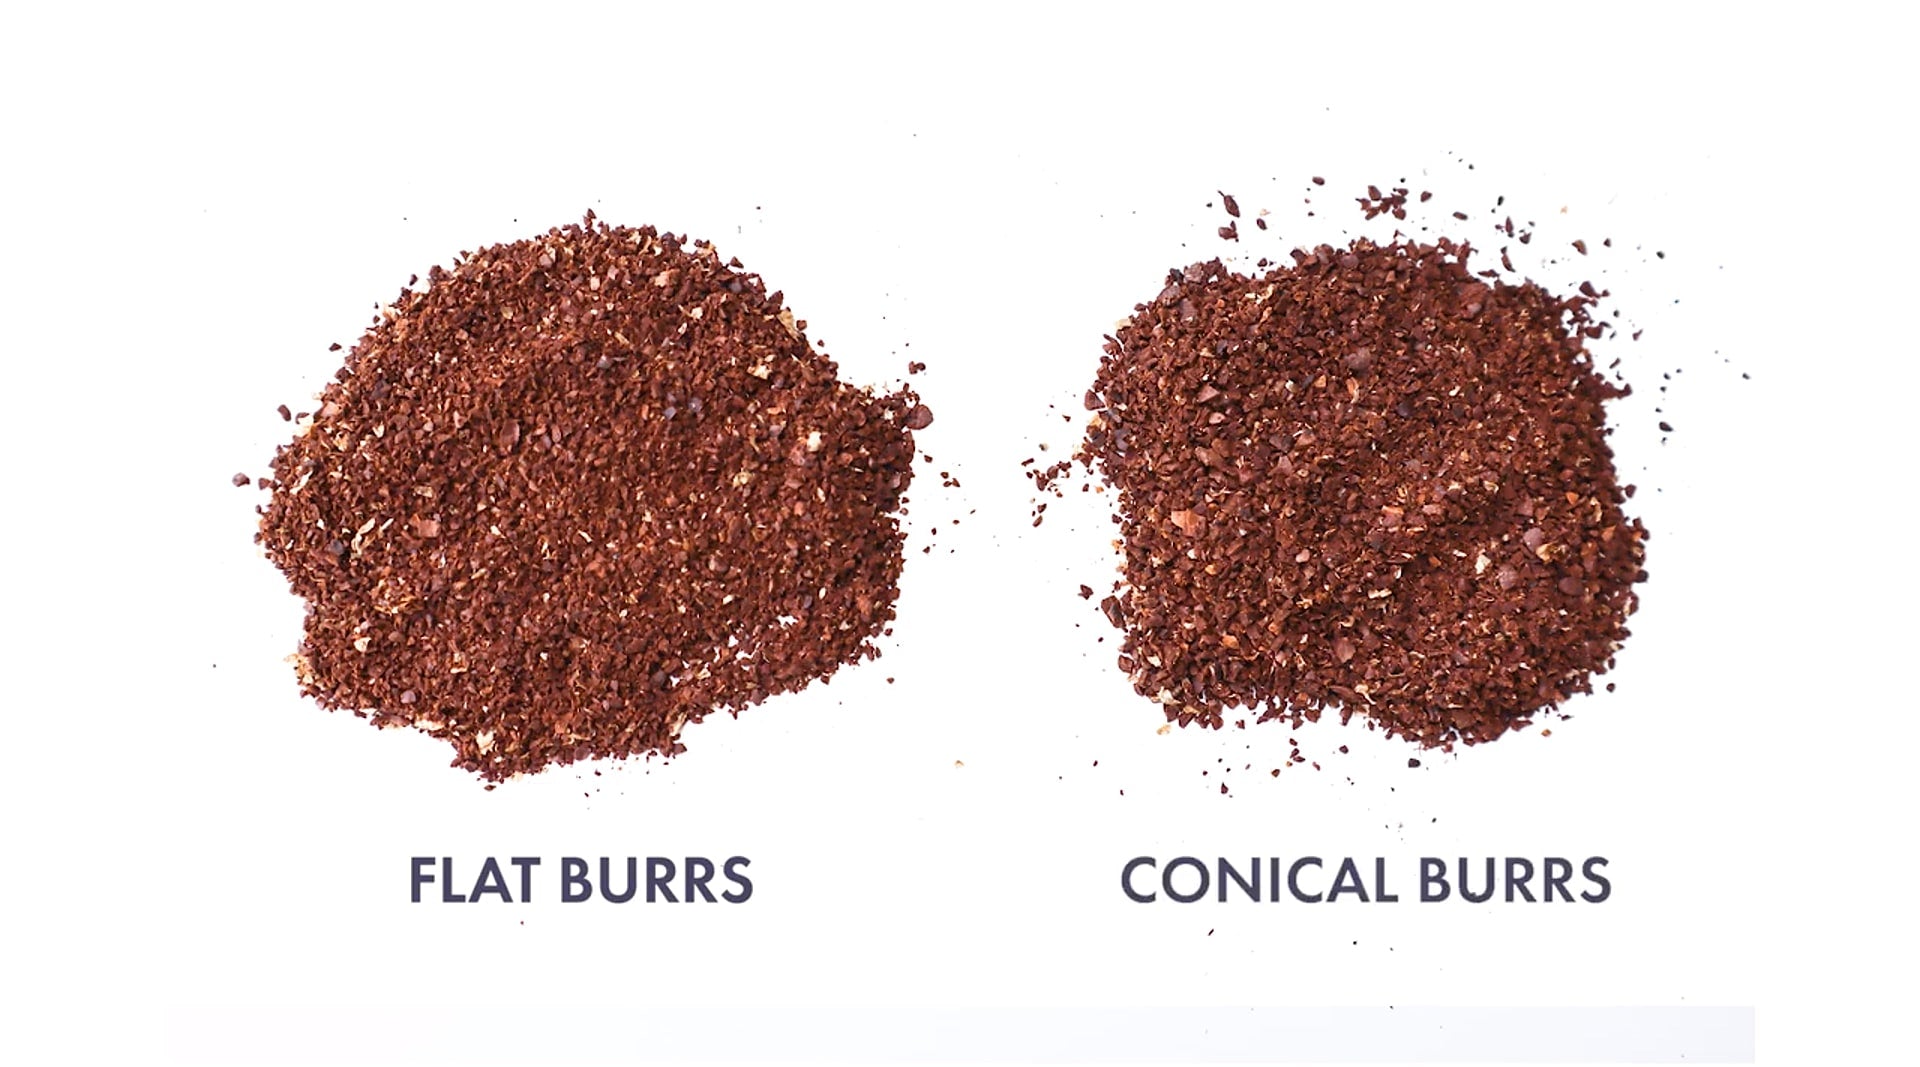 Ground coffee using flat burrs vs conical burrs